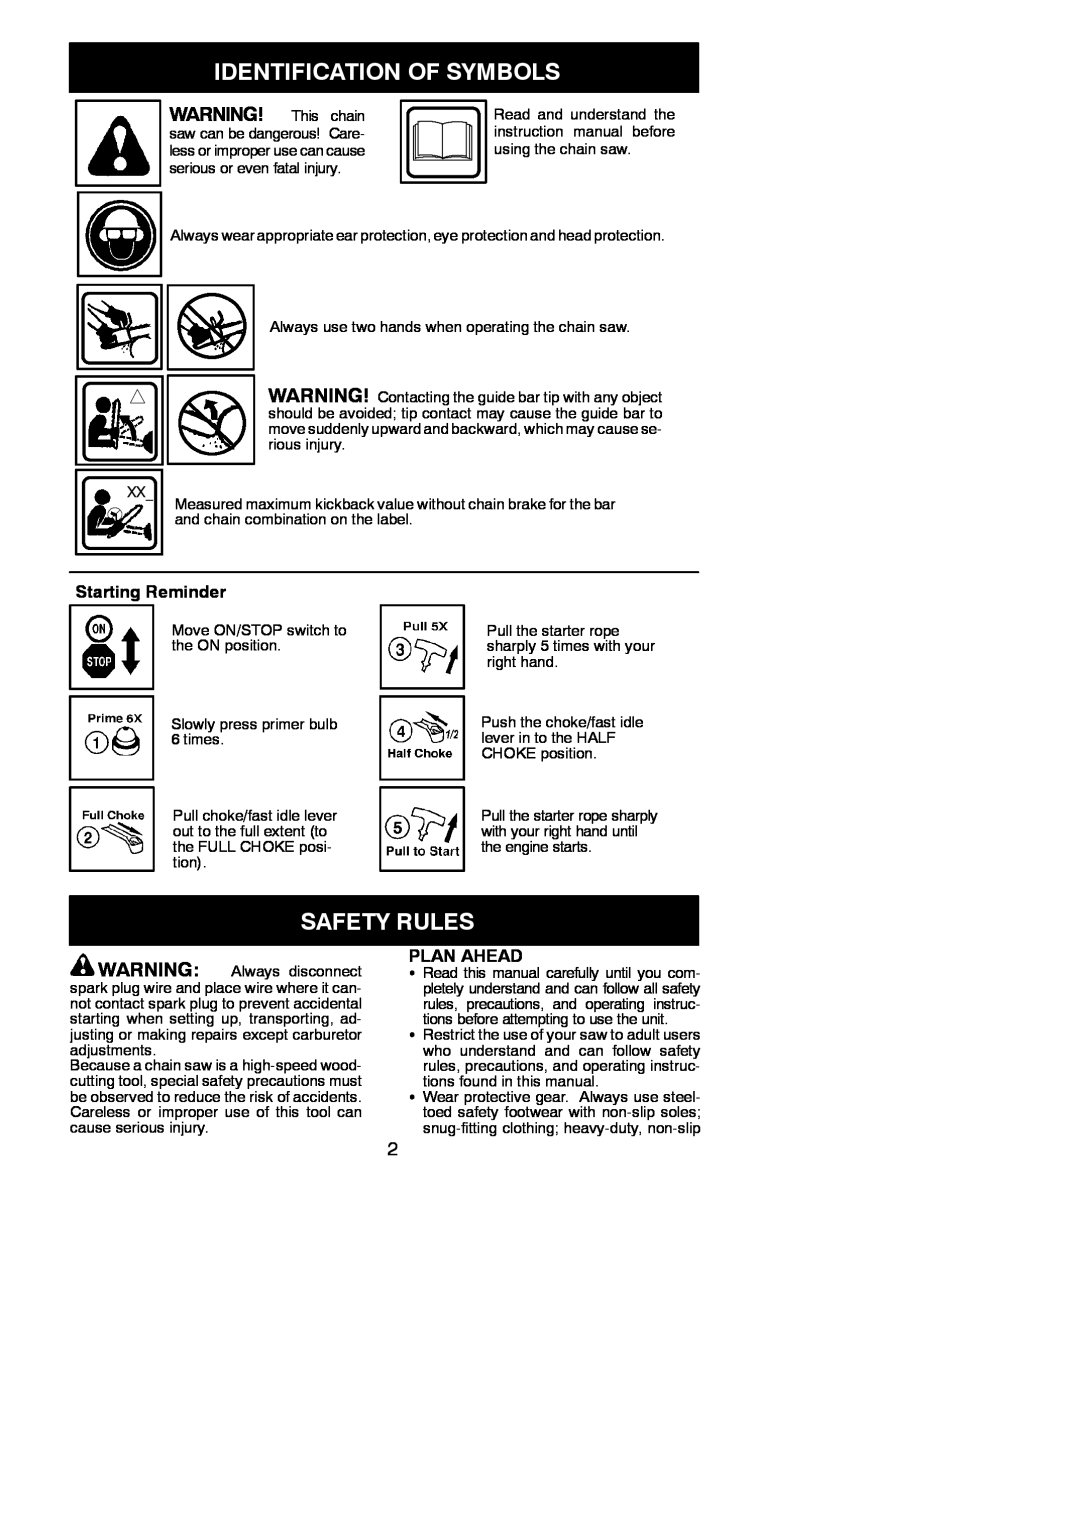 Poulan 545137224 instruction manual Identification Of Symbols, Safety Rules, Starting Reminder, Plan Ahead 